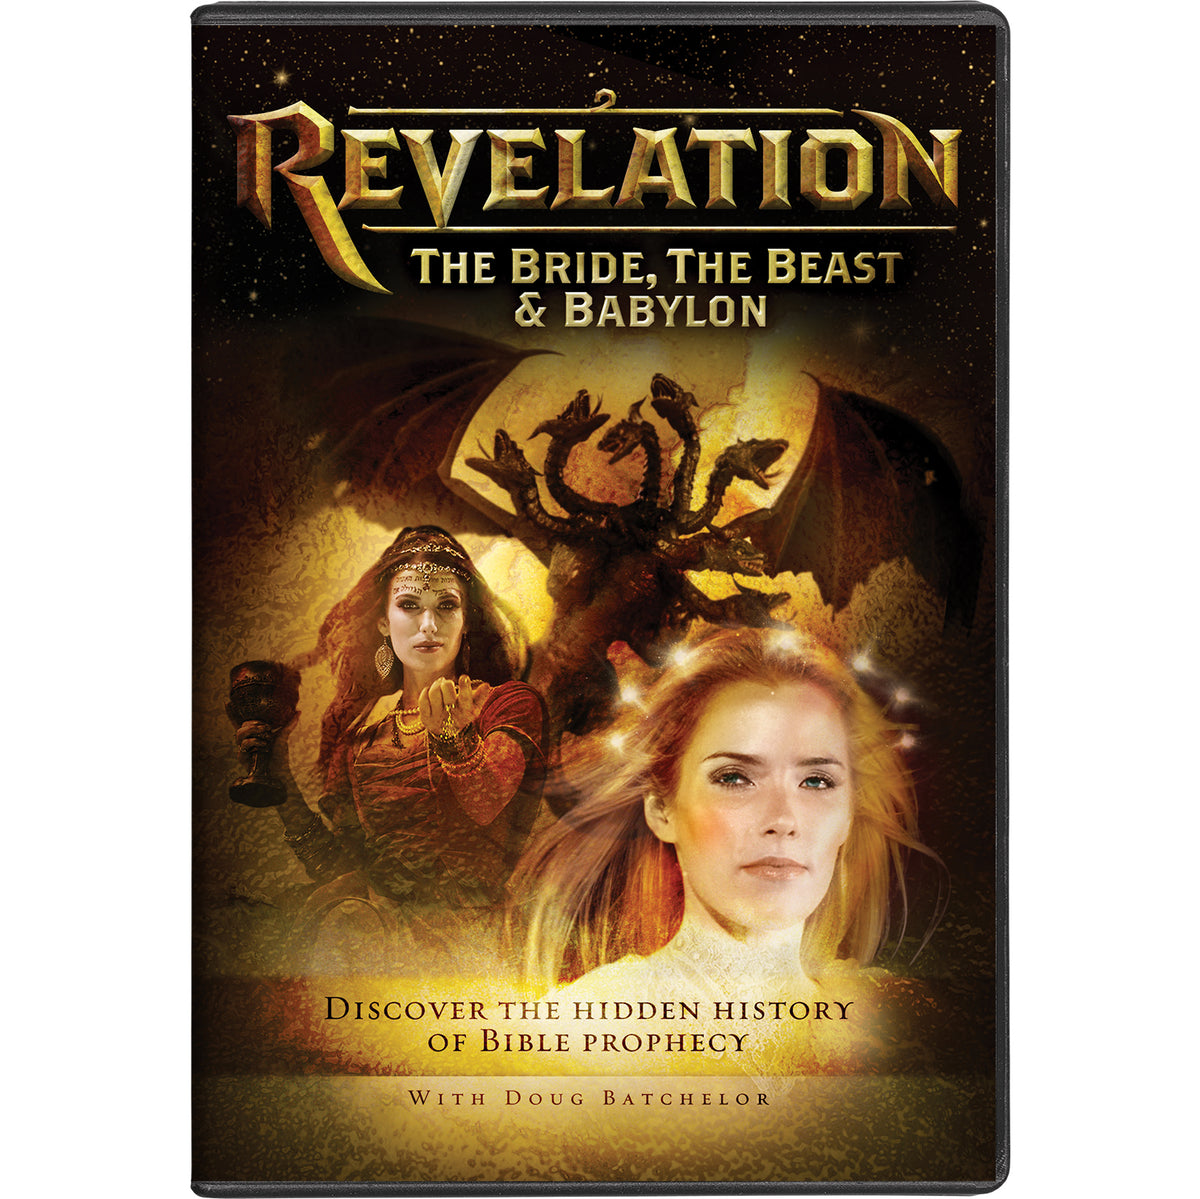 Revelation: The Bride, The Beast & Babylon DVD by Amazing Facts